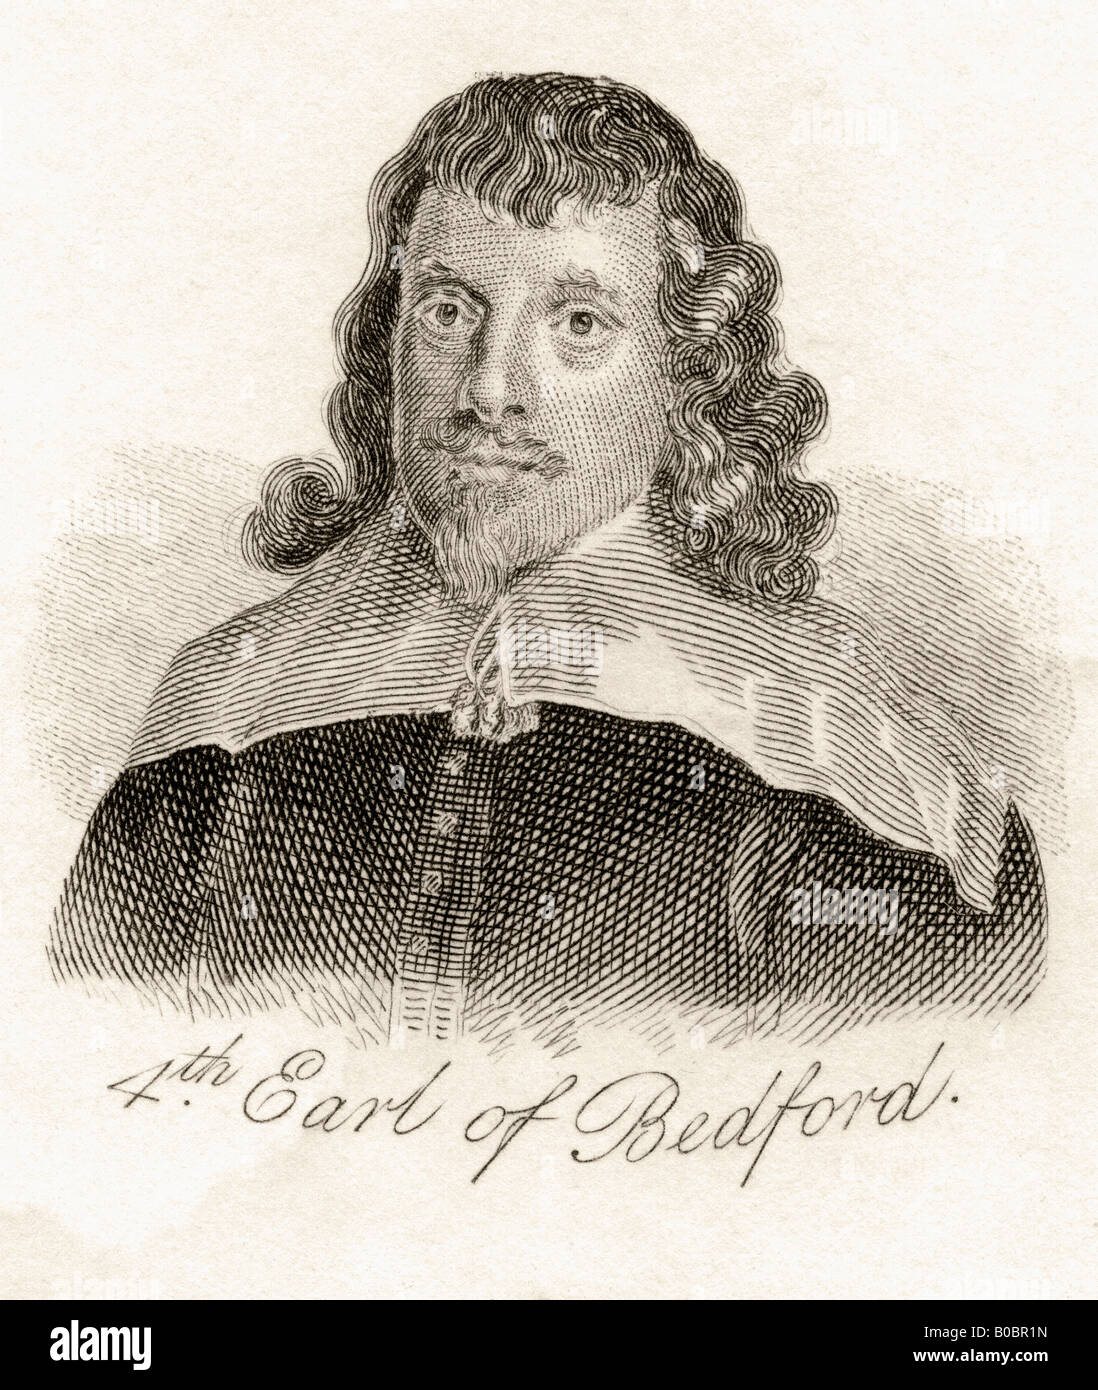 Francis Russell, 4th Earl of Bedford, 1593 -1641. English nobleman. From the book Crabbs Historical Dictionary, published 1825. Stock Photo